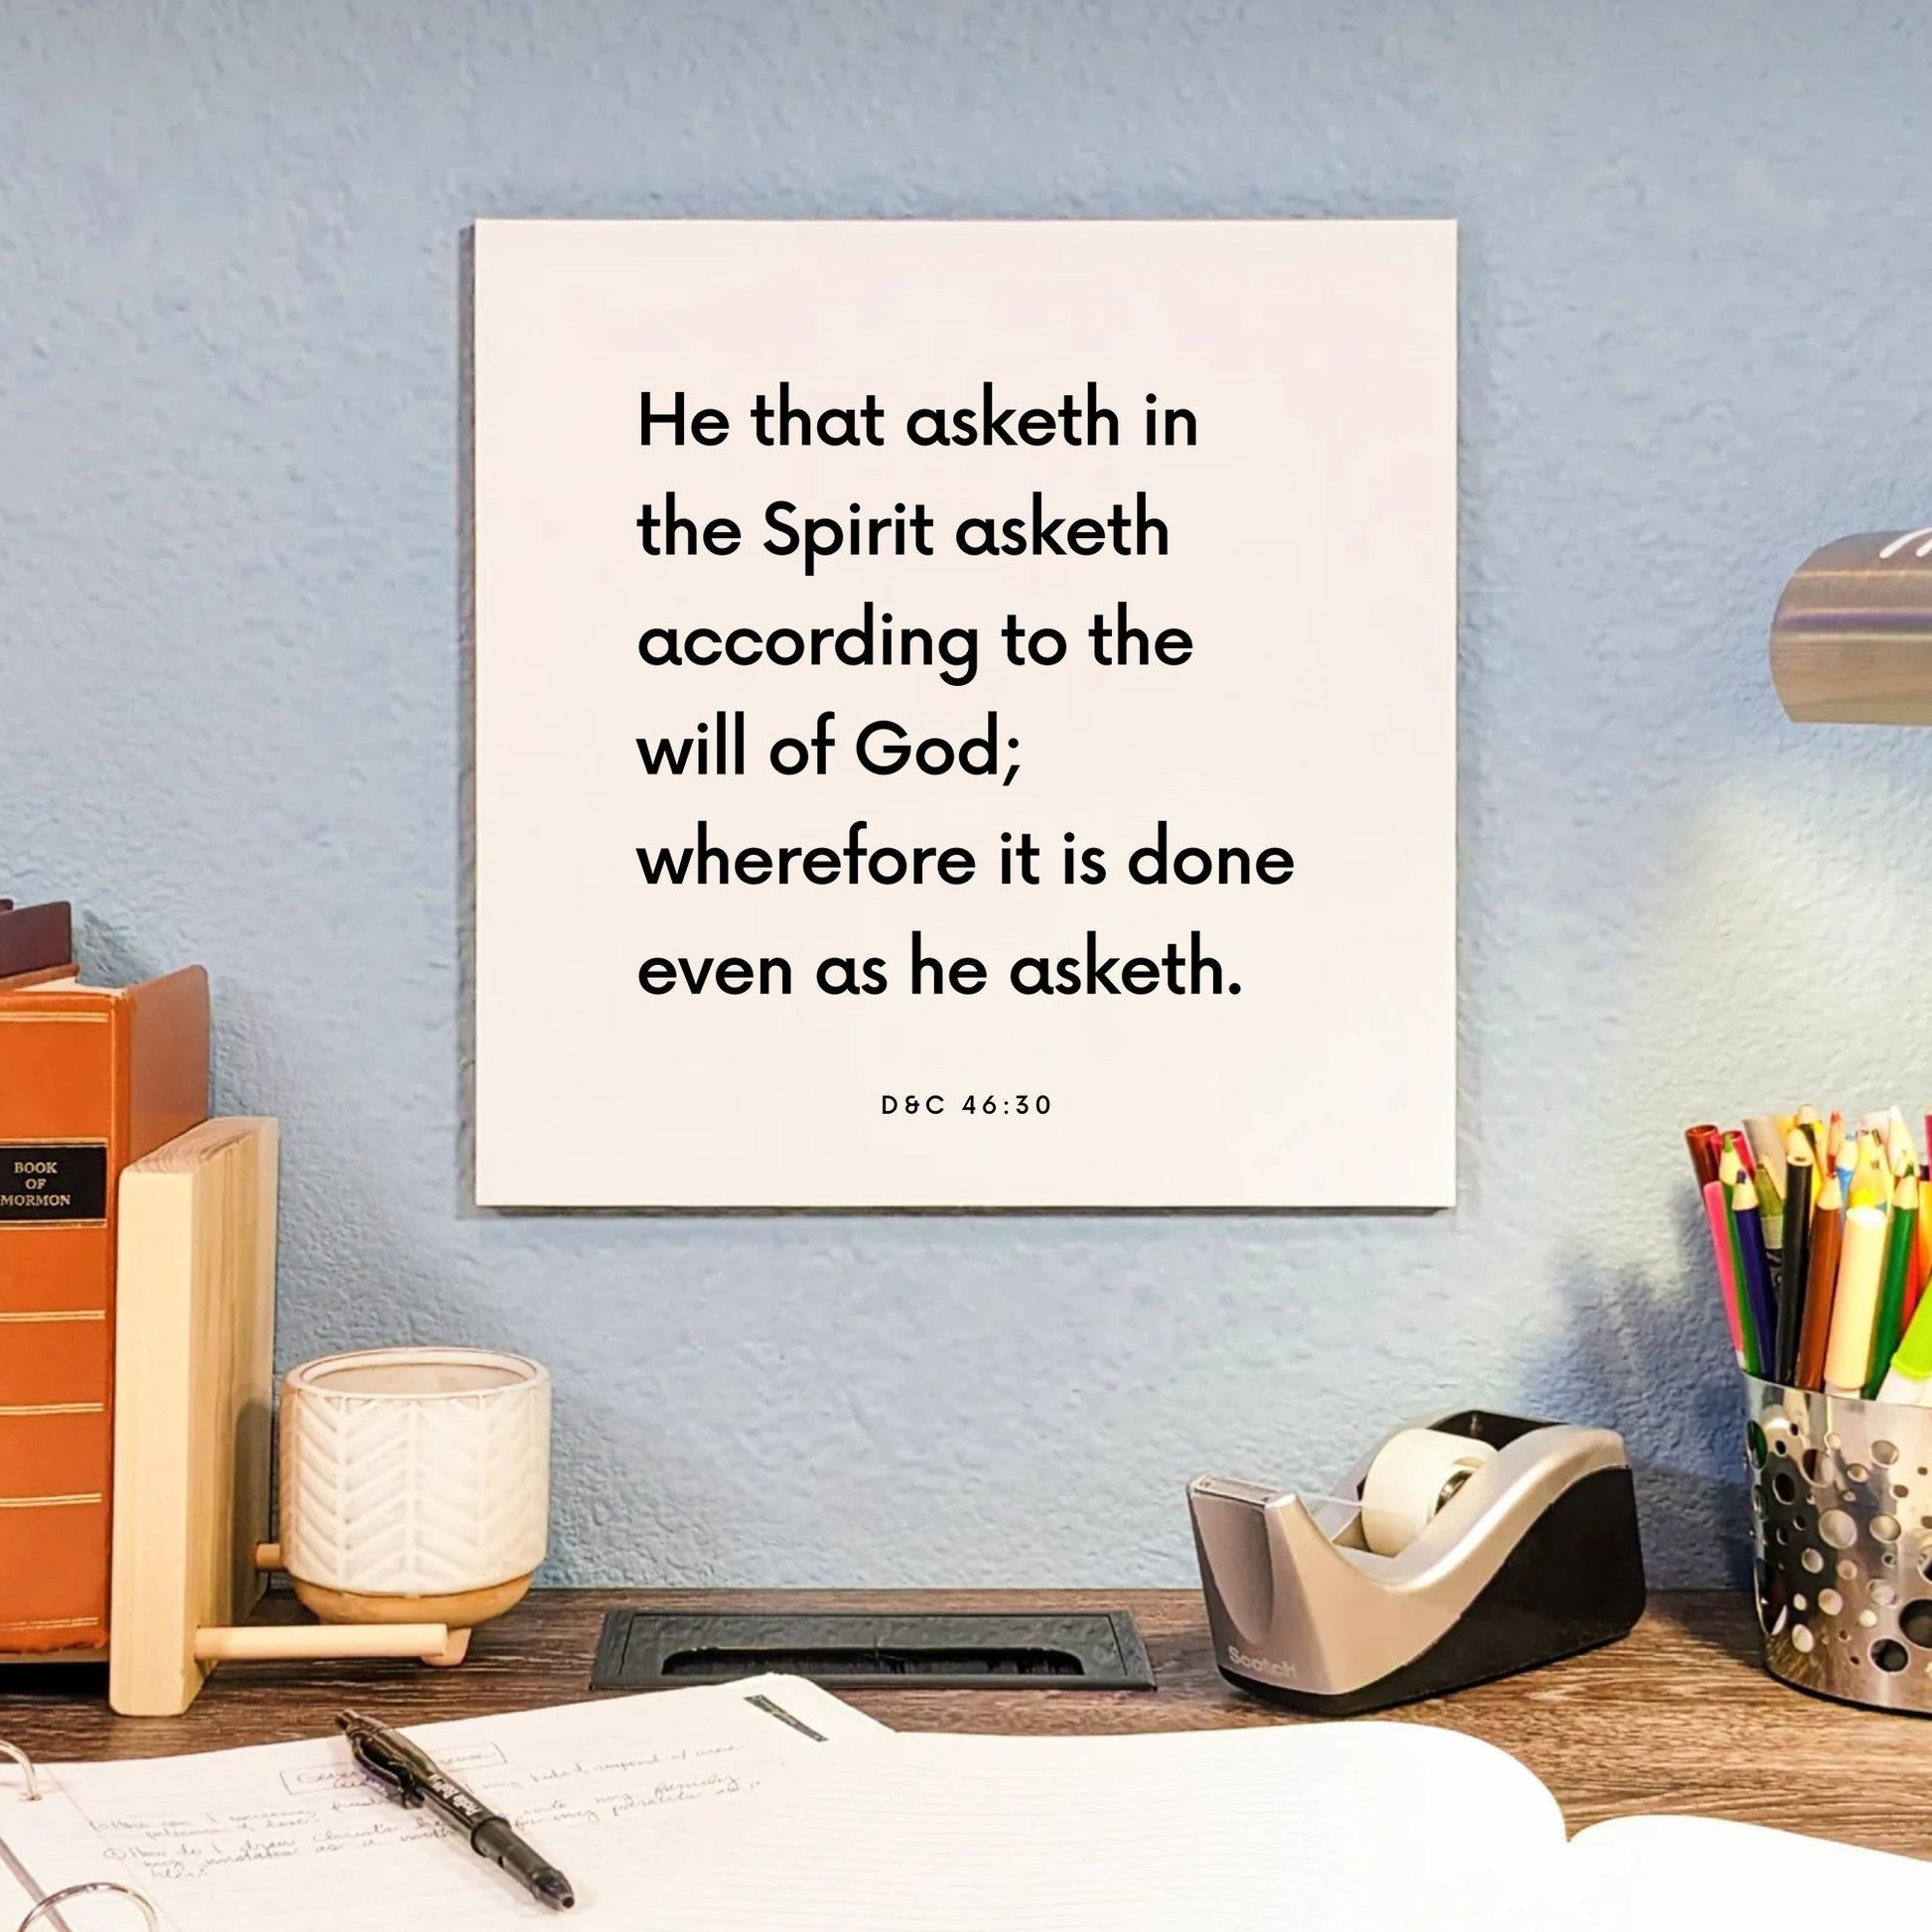 Desk mouting of the scripture tile for D&C 46:30 - "He that asketh in the Spirit"